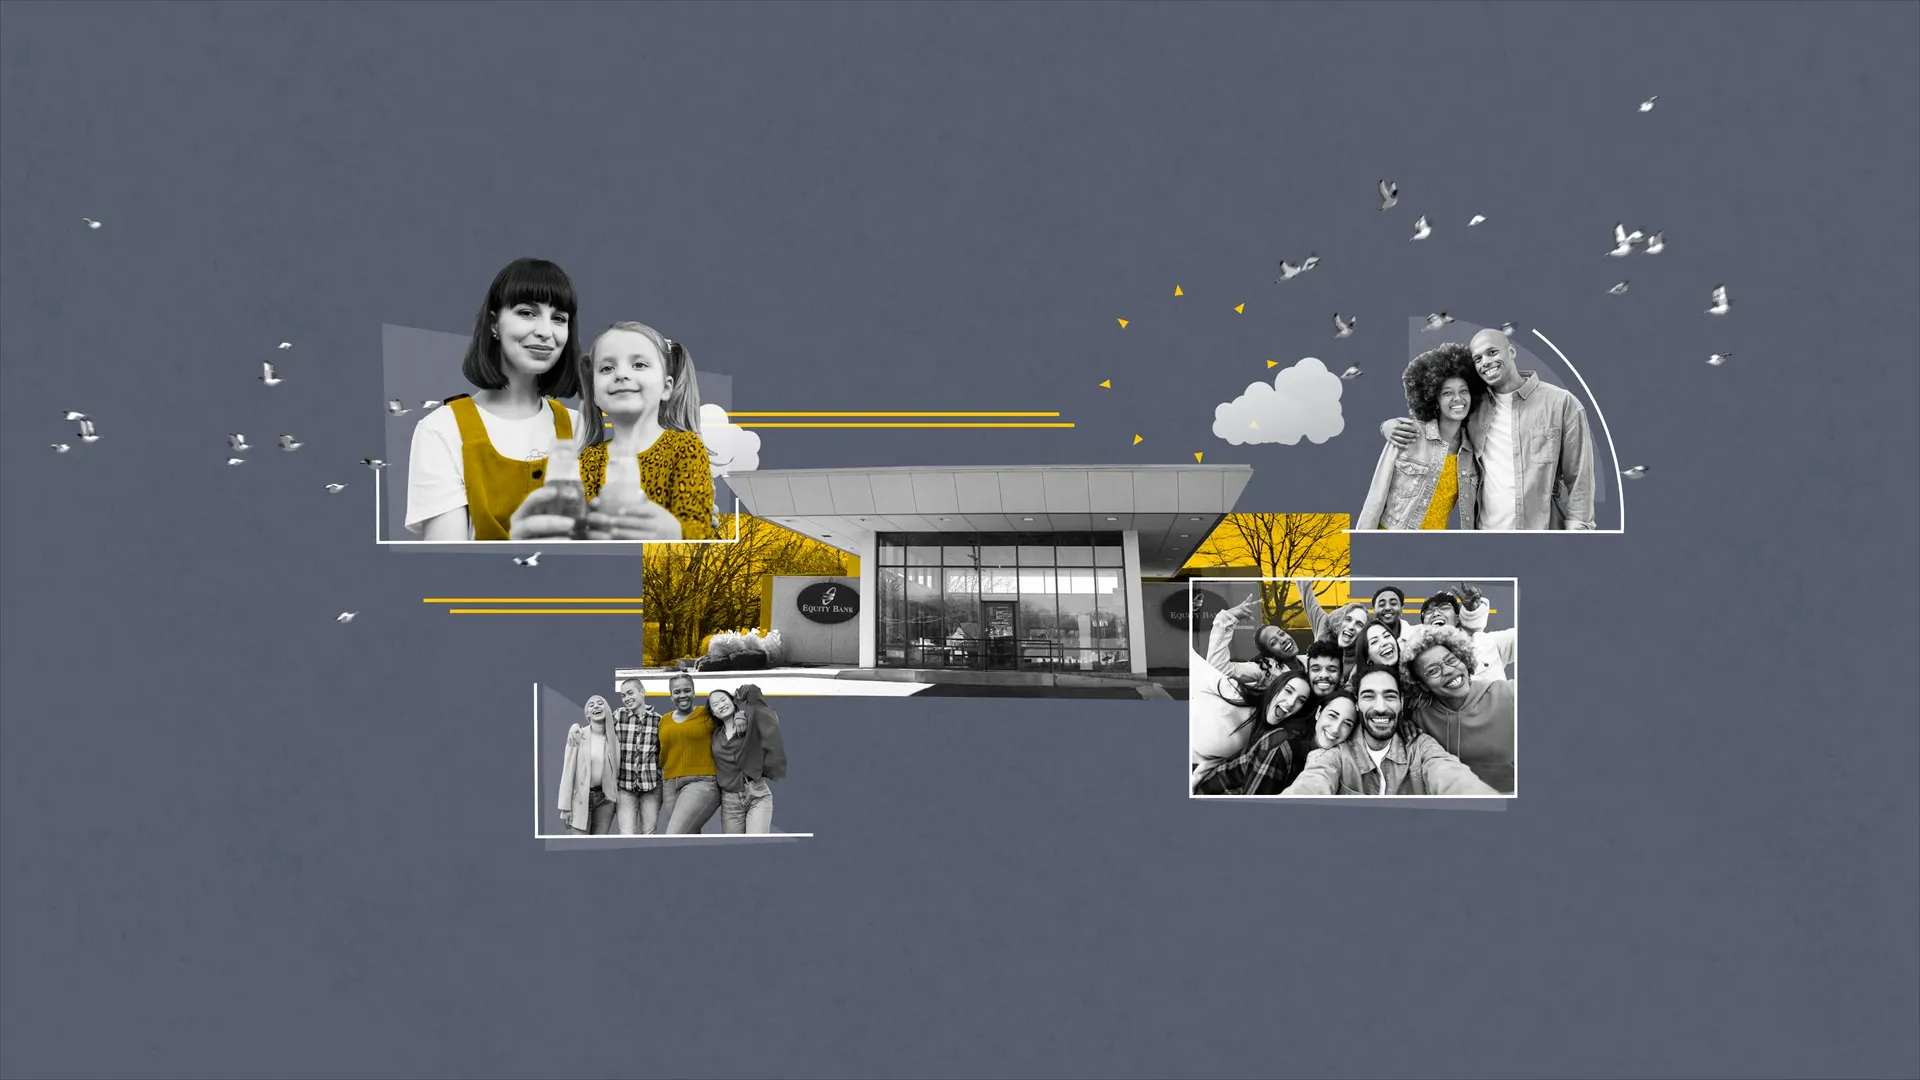 Snapshots of families and community members are superimposed over a photo of a local Equity Bank branch with a gray background.